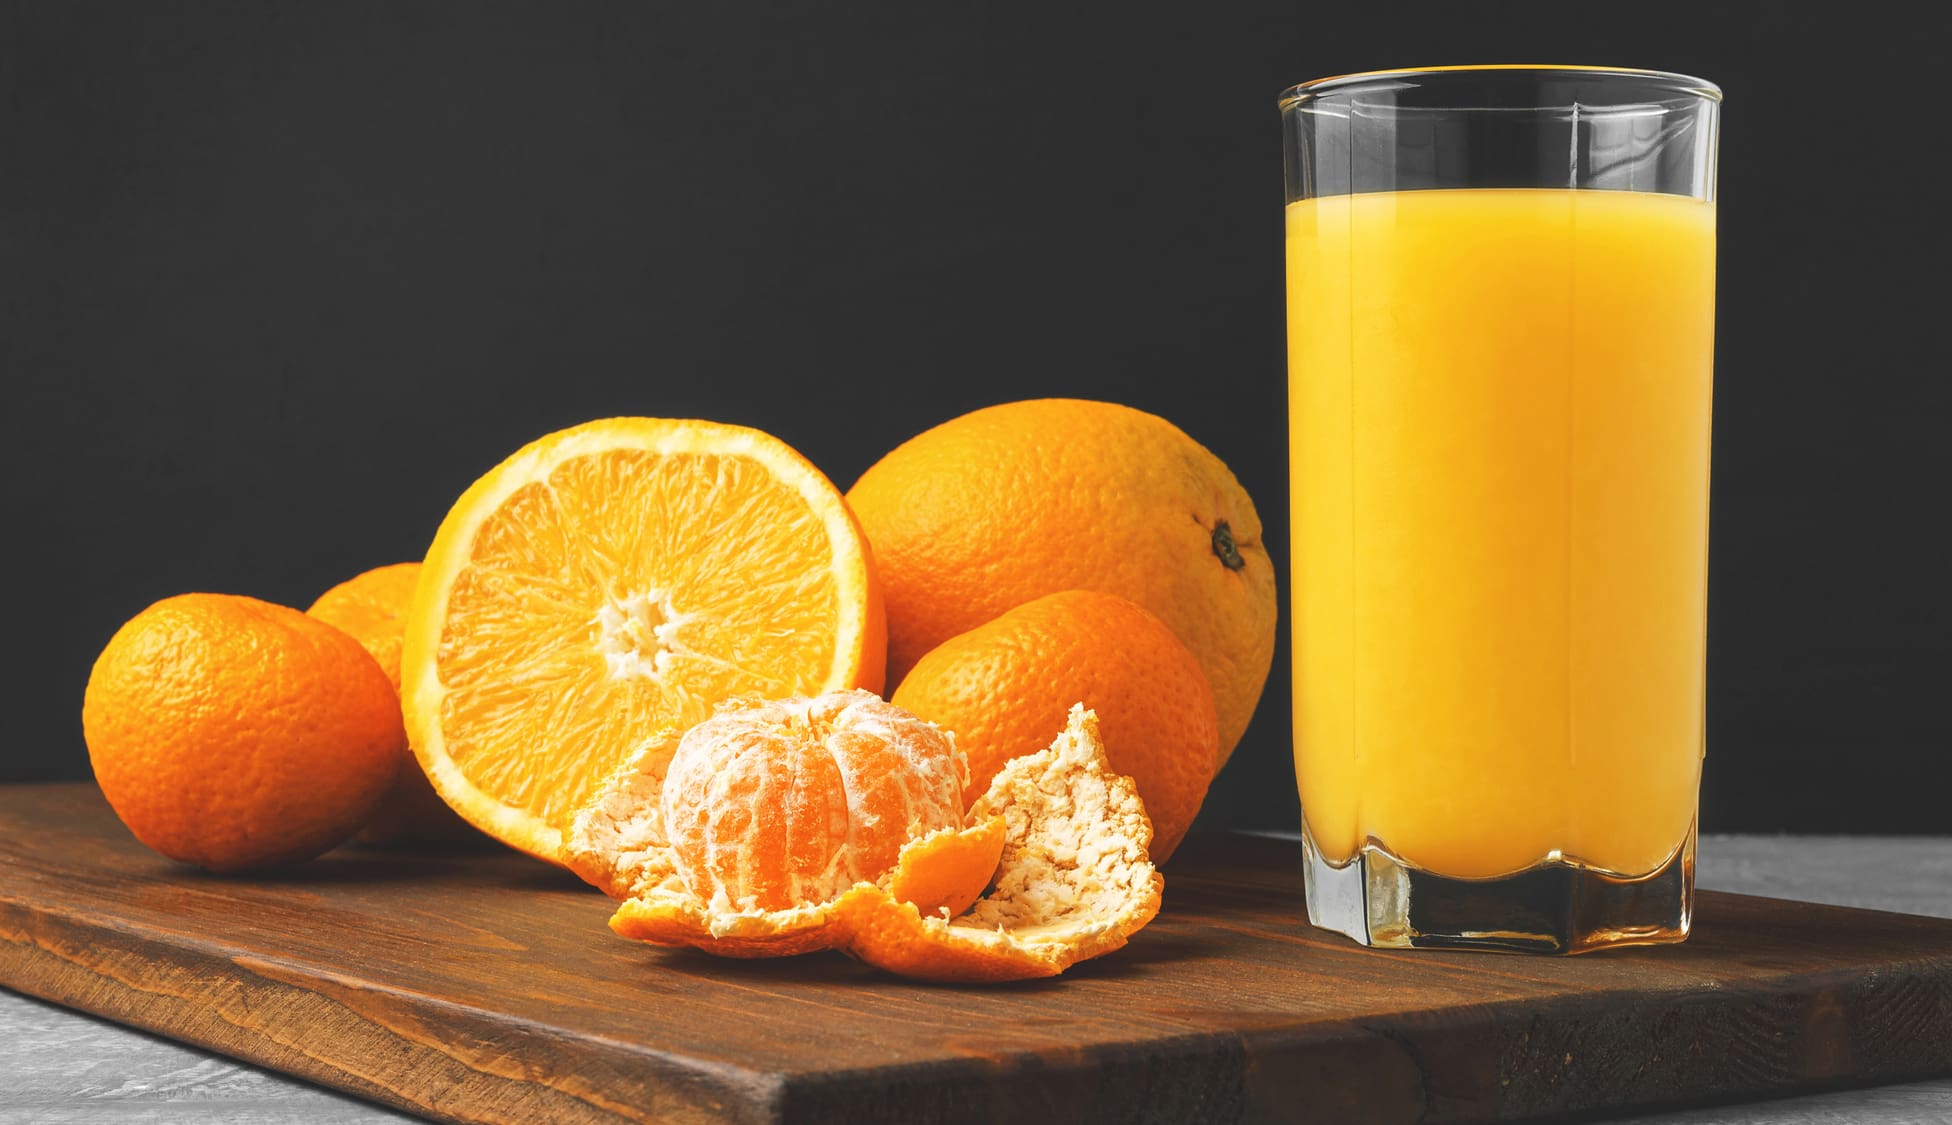 Glass of fresh orange juice, whole and sliced fruits on wooden board